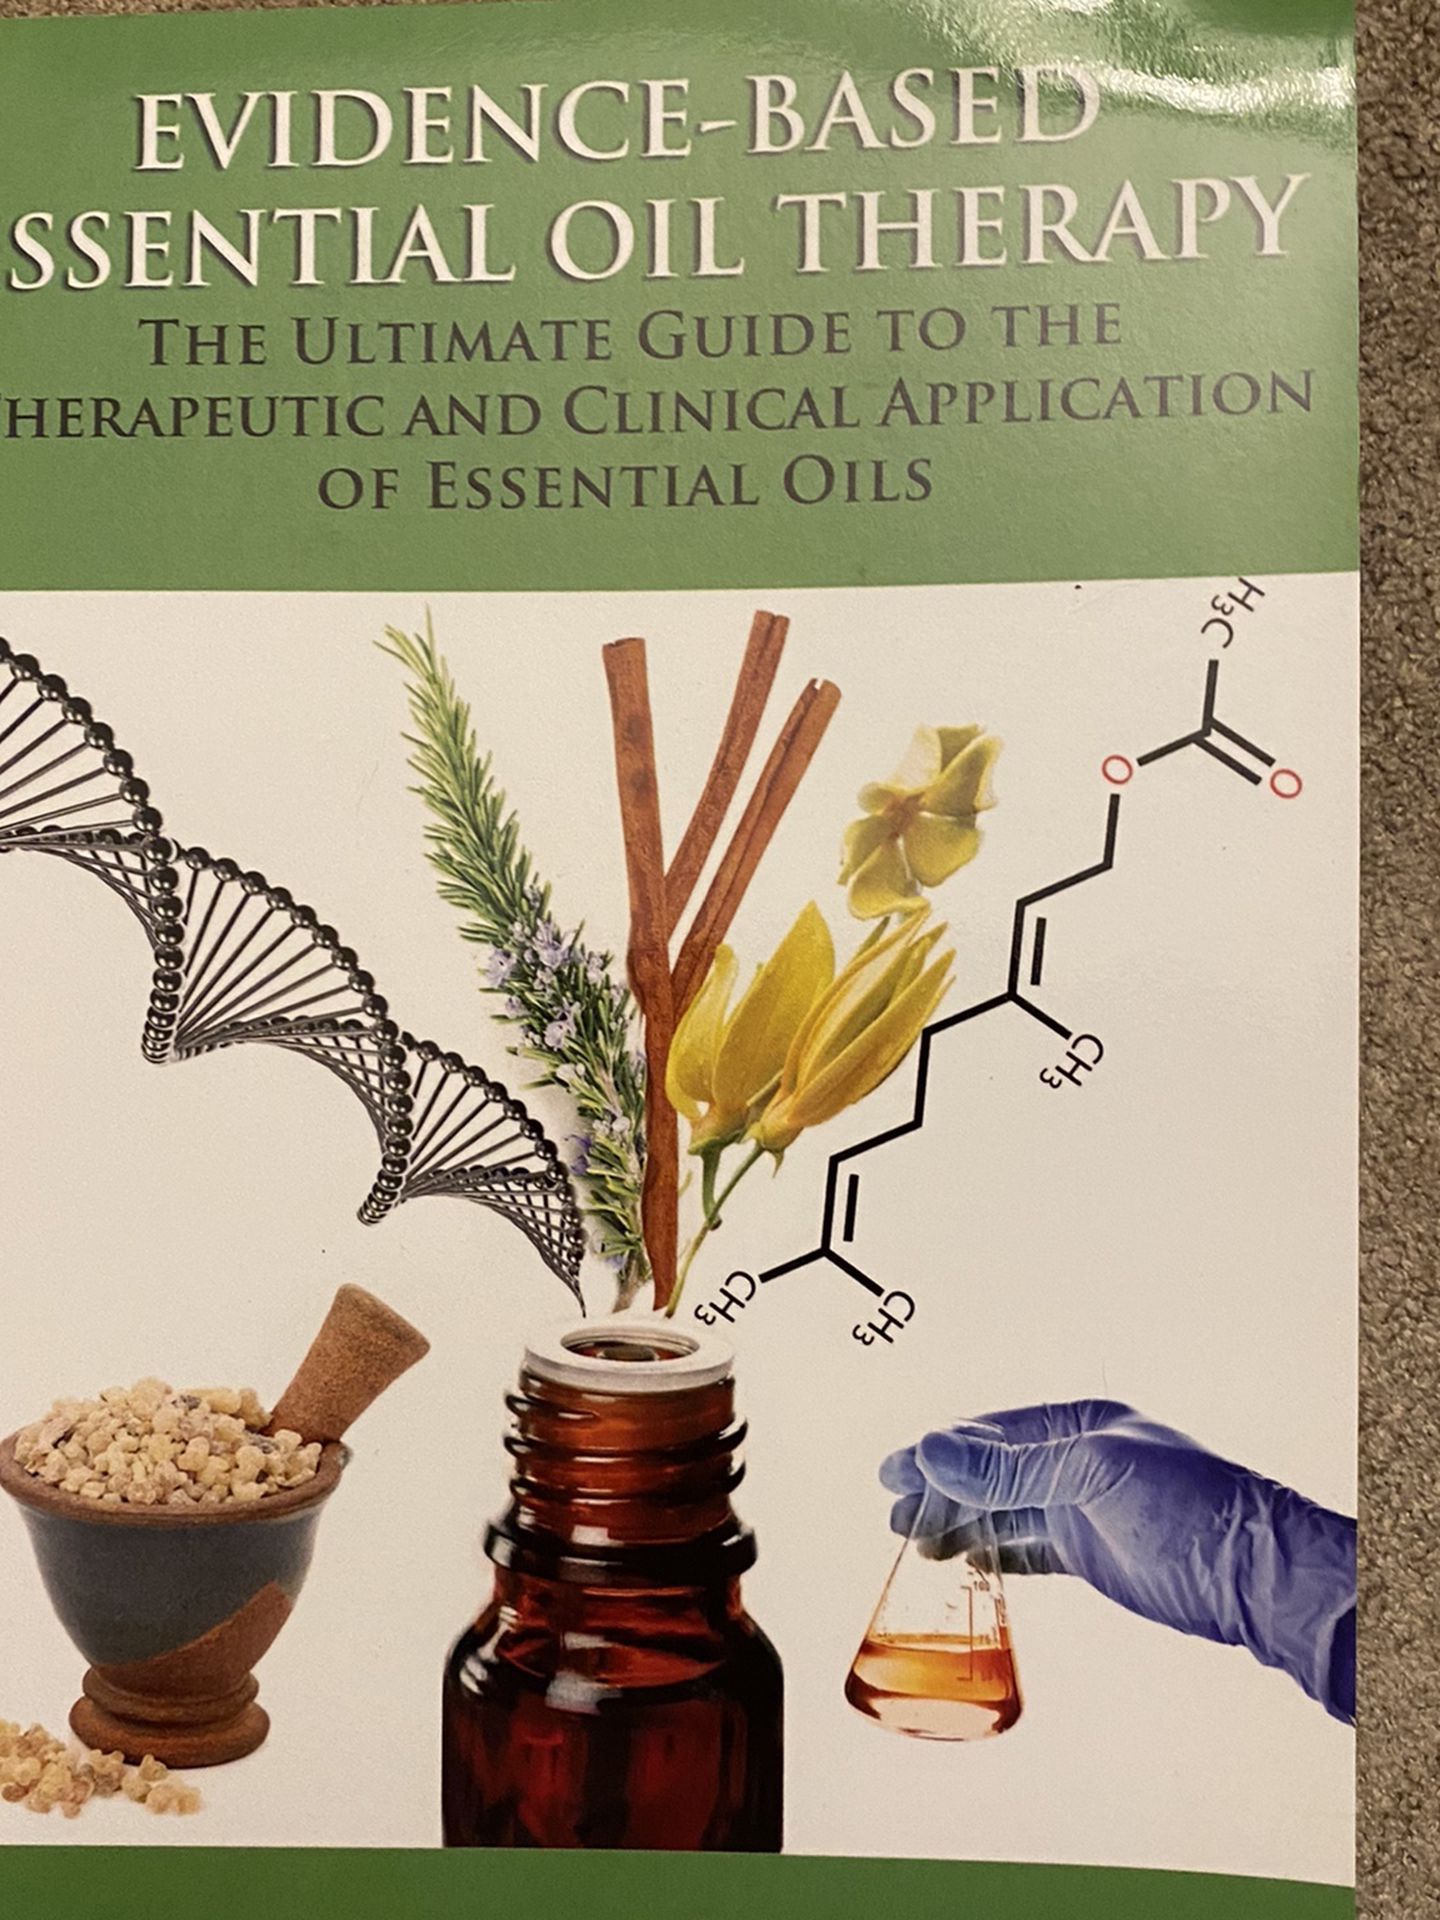 Evidence Based Essential Oil Therapy